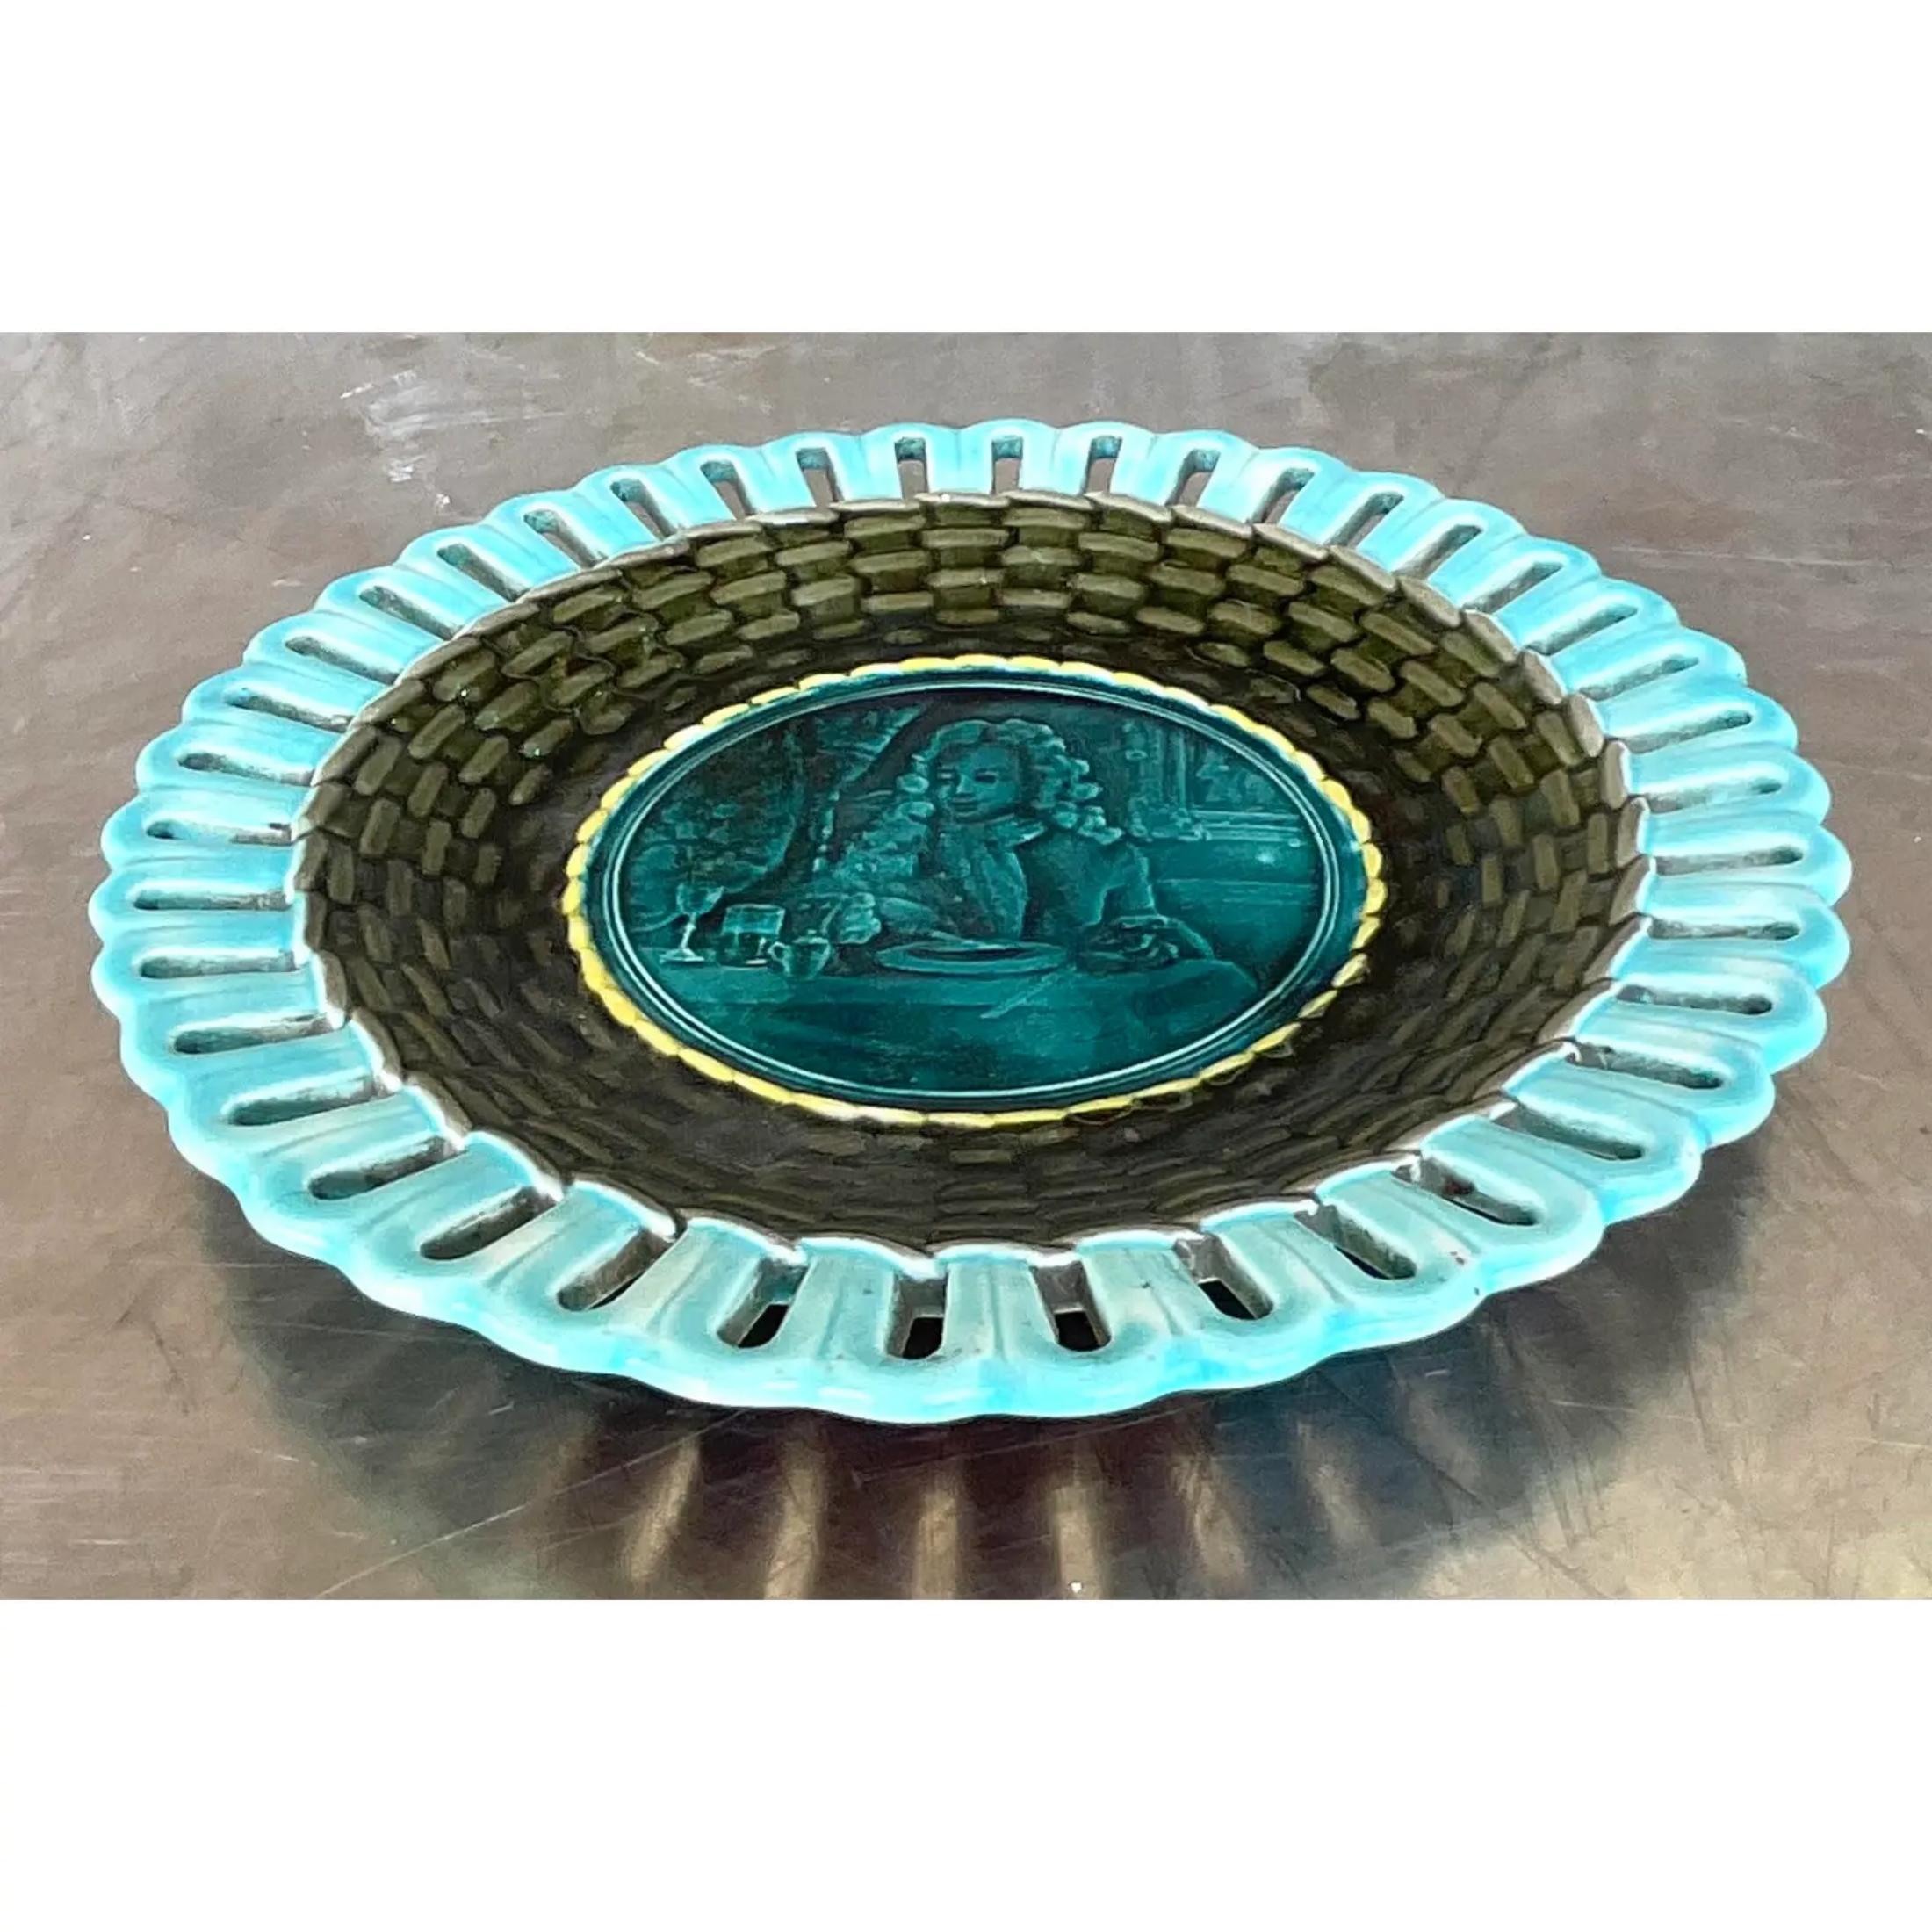 A fantastic vintage Regency plate. Made by the iconic Wedgwood group and signed on the bottom. A beautiful blue green high gloss glazed finish. Acquired from a Palm Beach estate